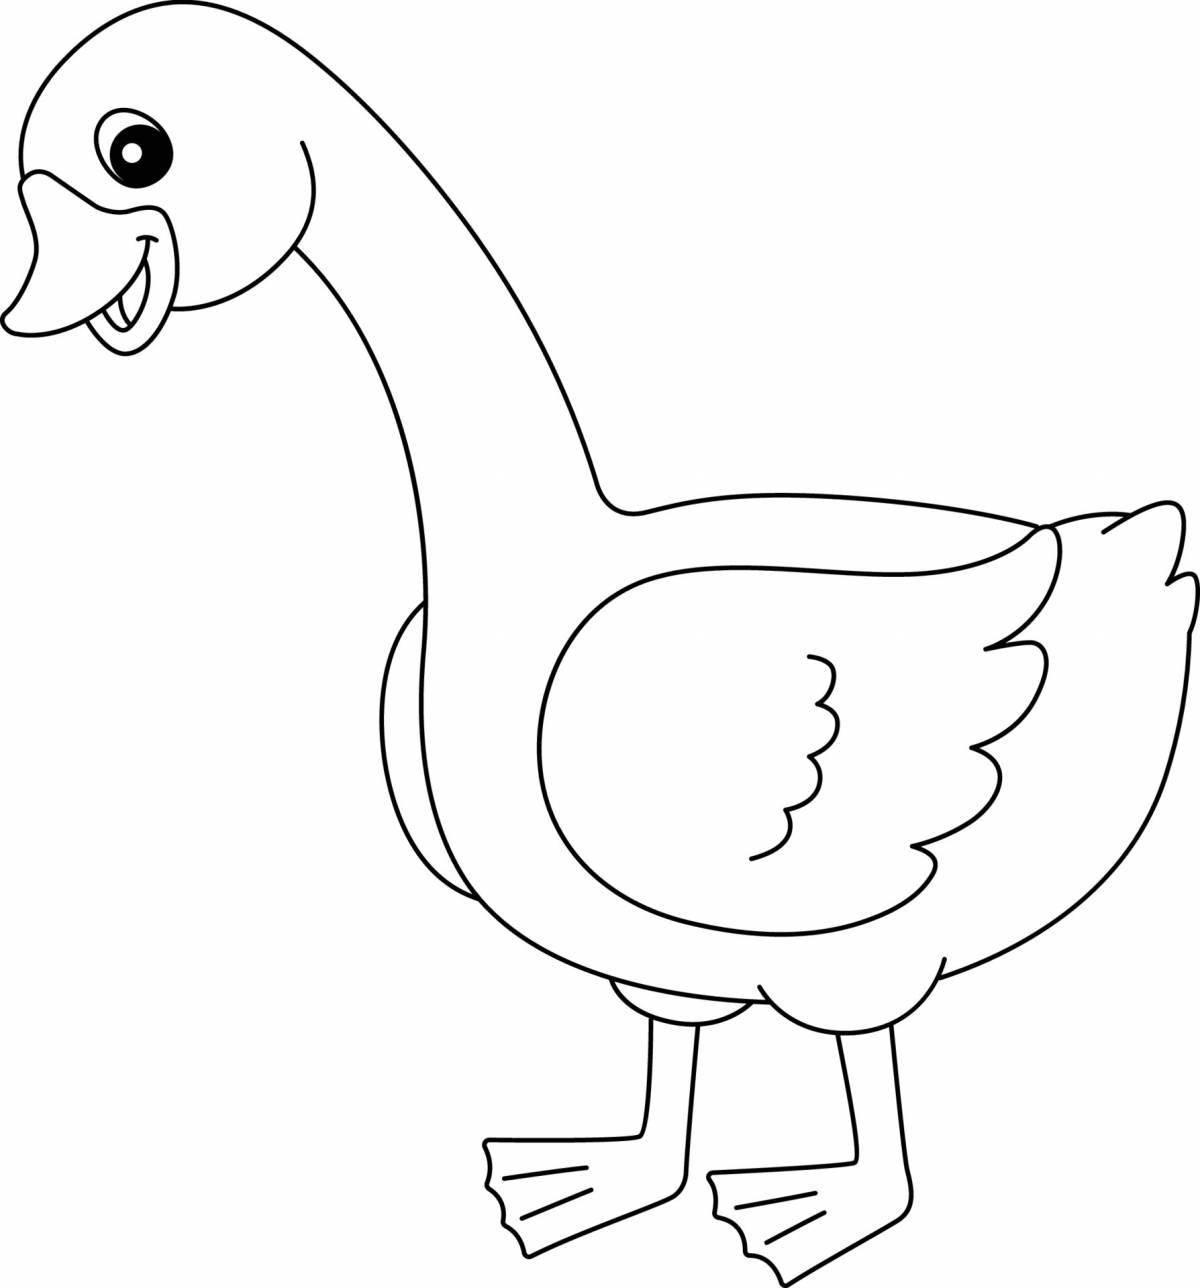 Coloring book fluffy goose for children 6-7 years old